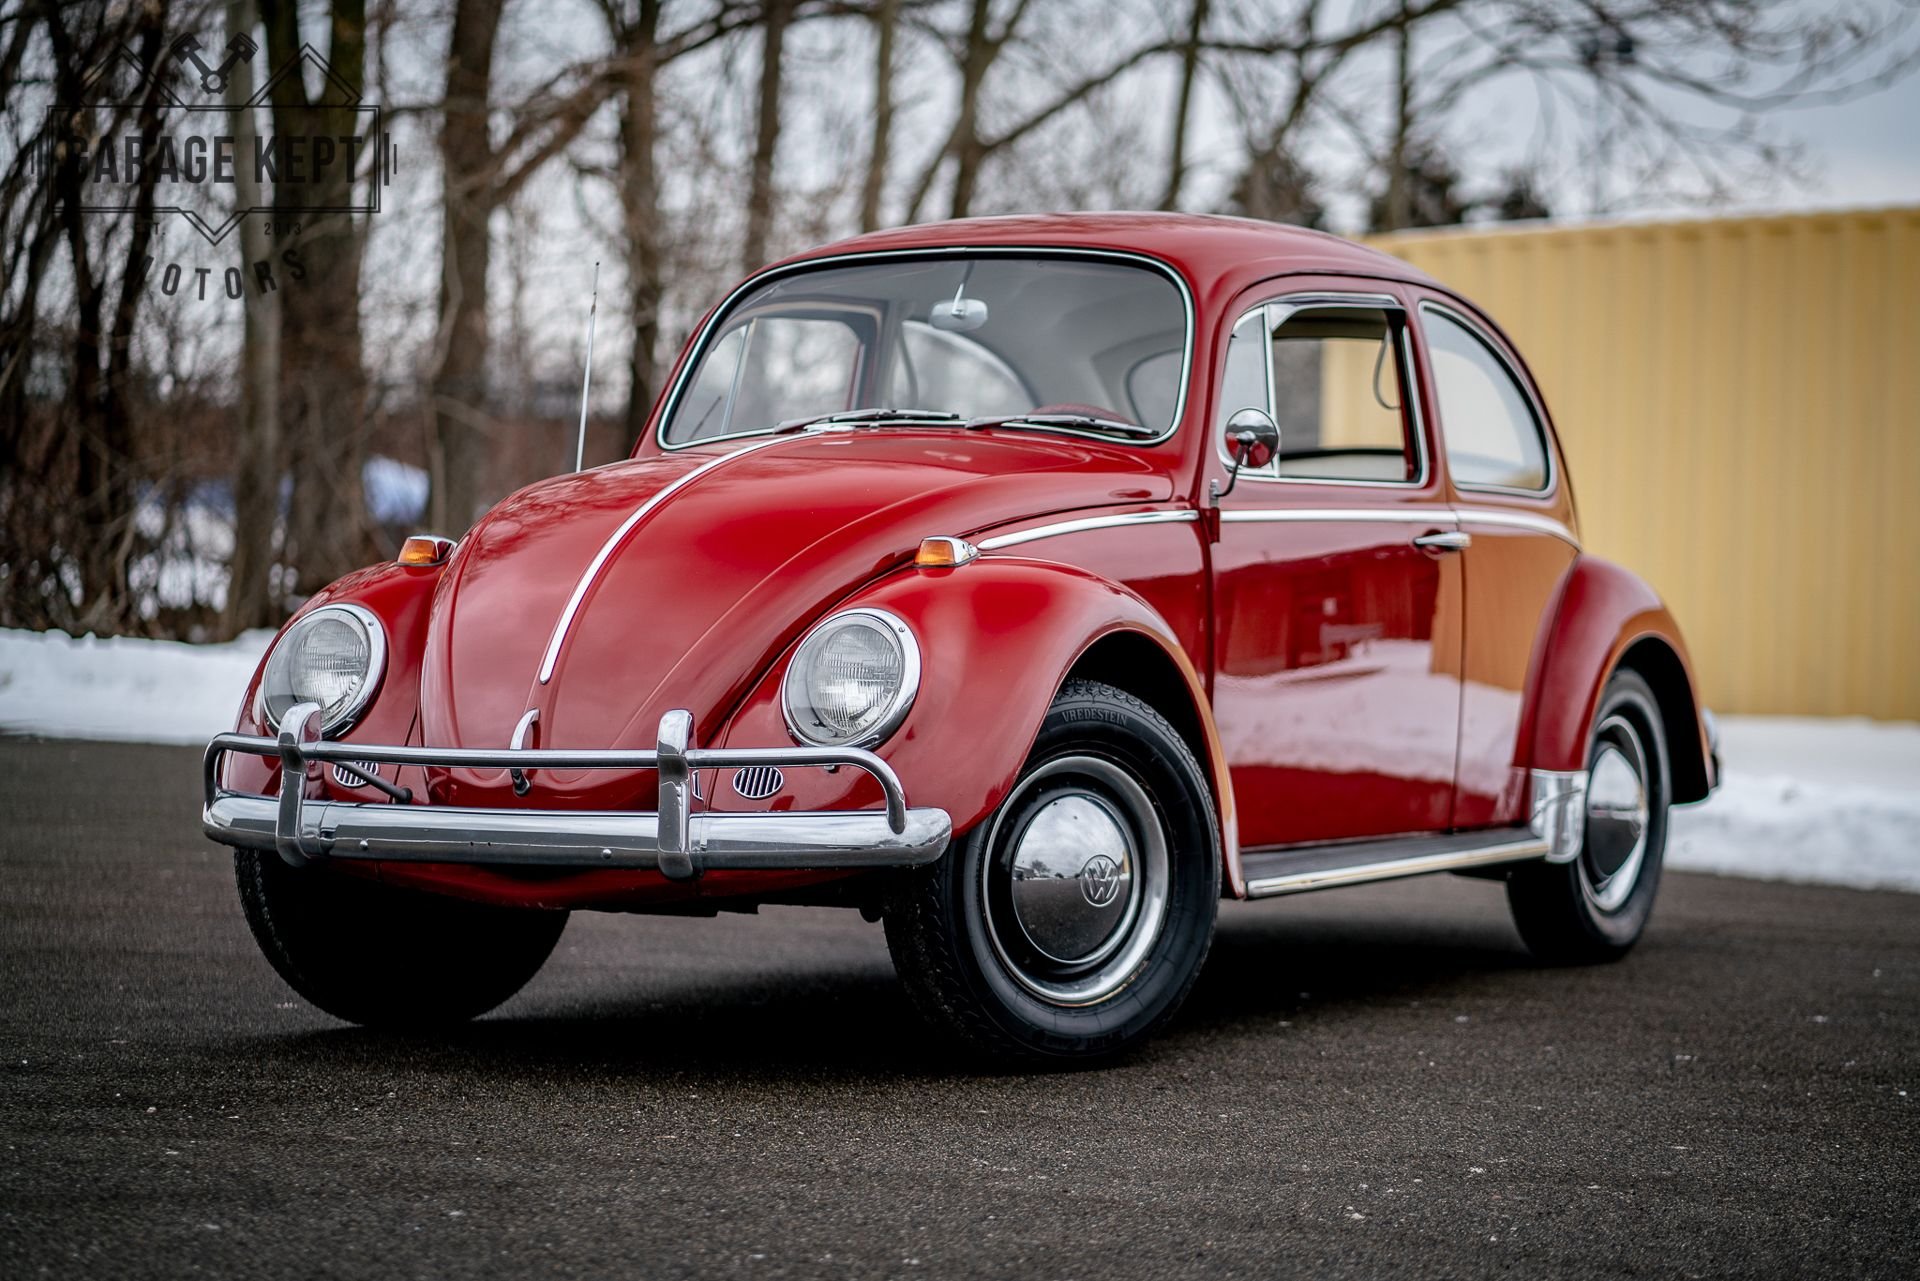 All-Original, Survivor 1965 VW Beetle Had One Owner and Trips of